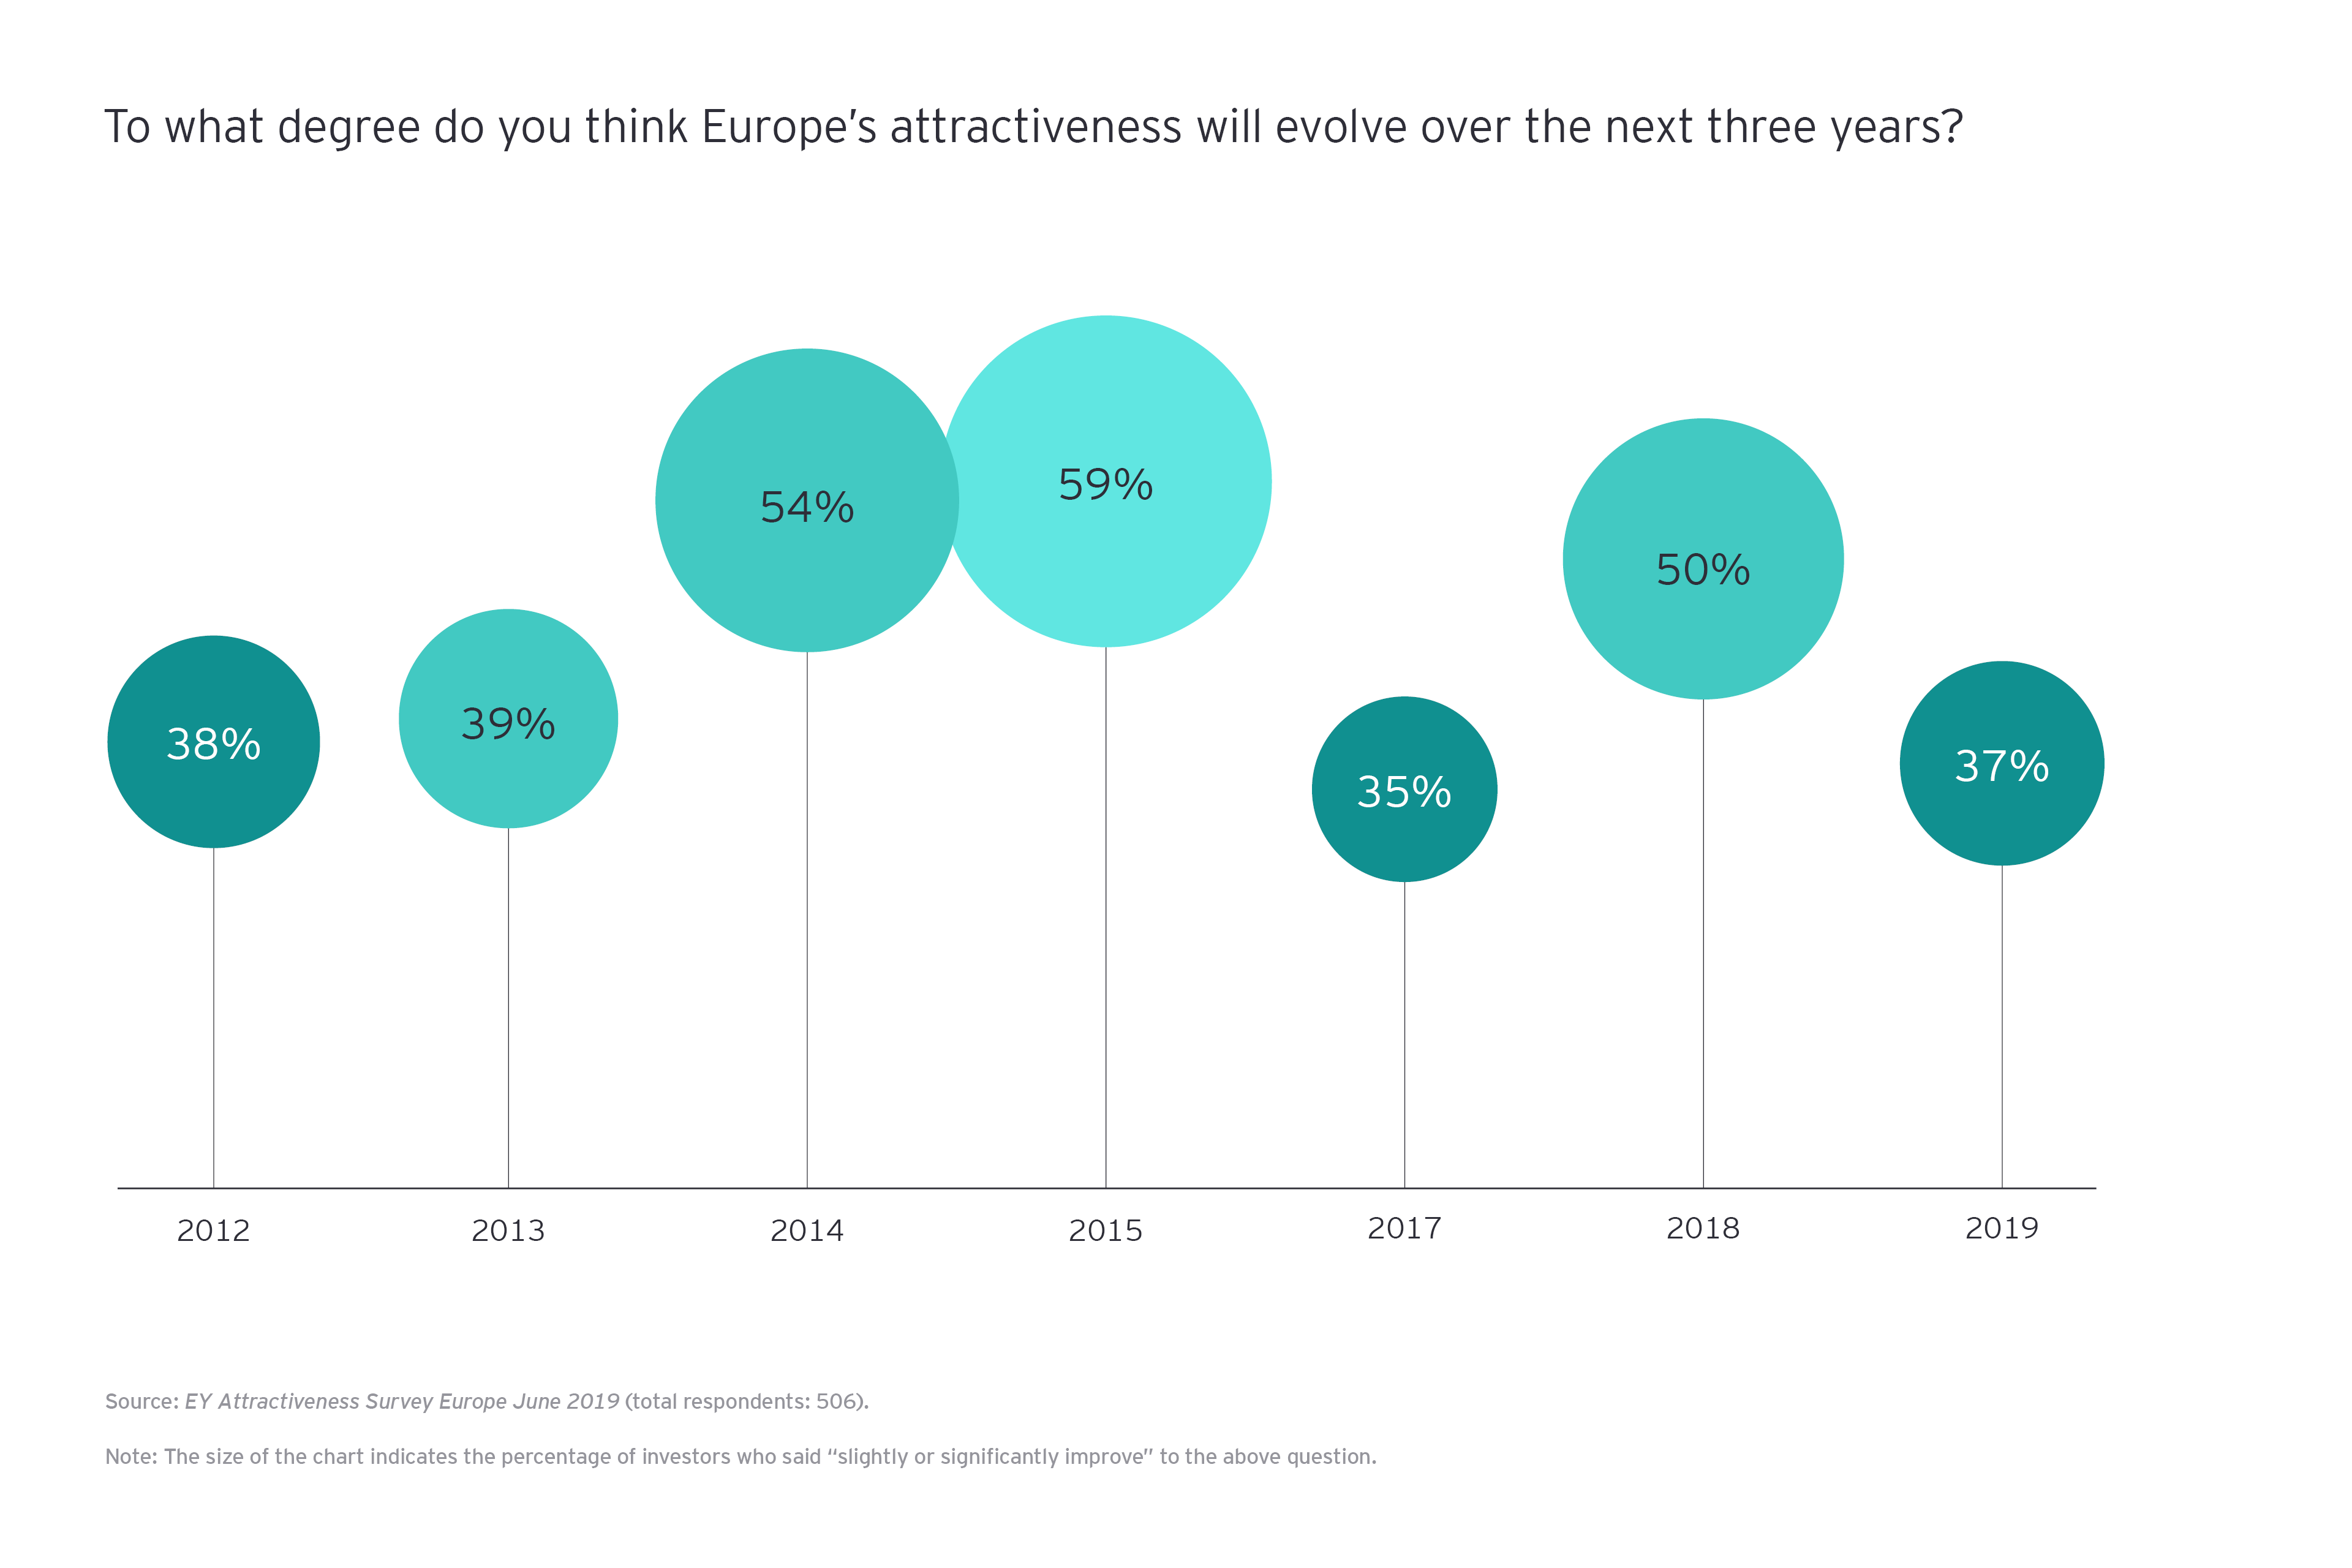 To what degree do you think Europe's attractiveness will evolve over the next three years graph